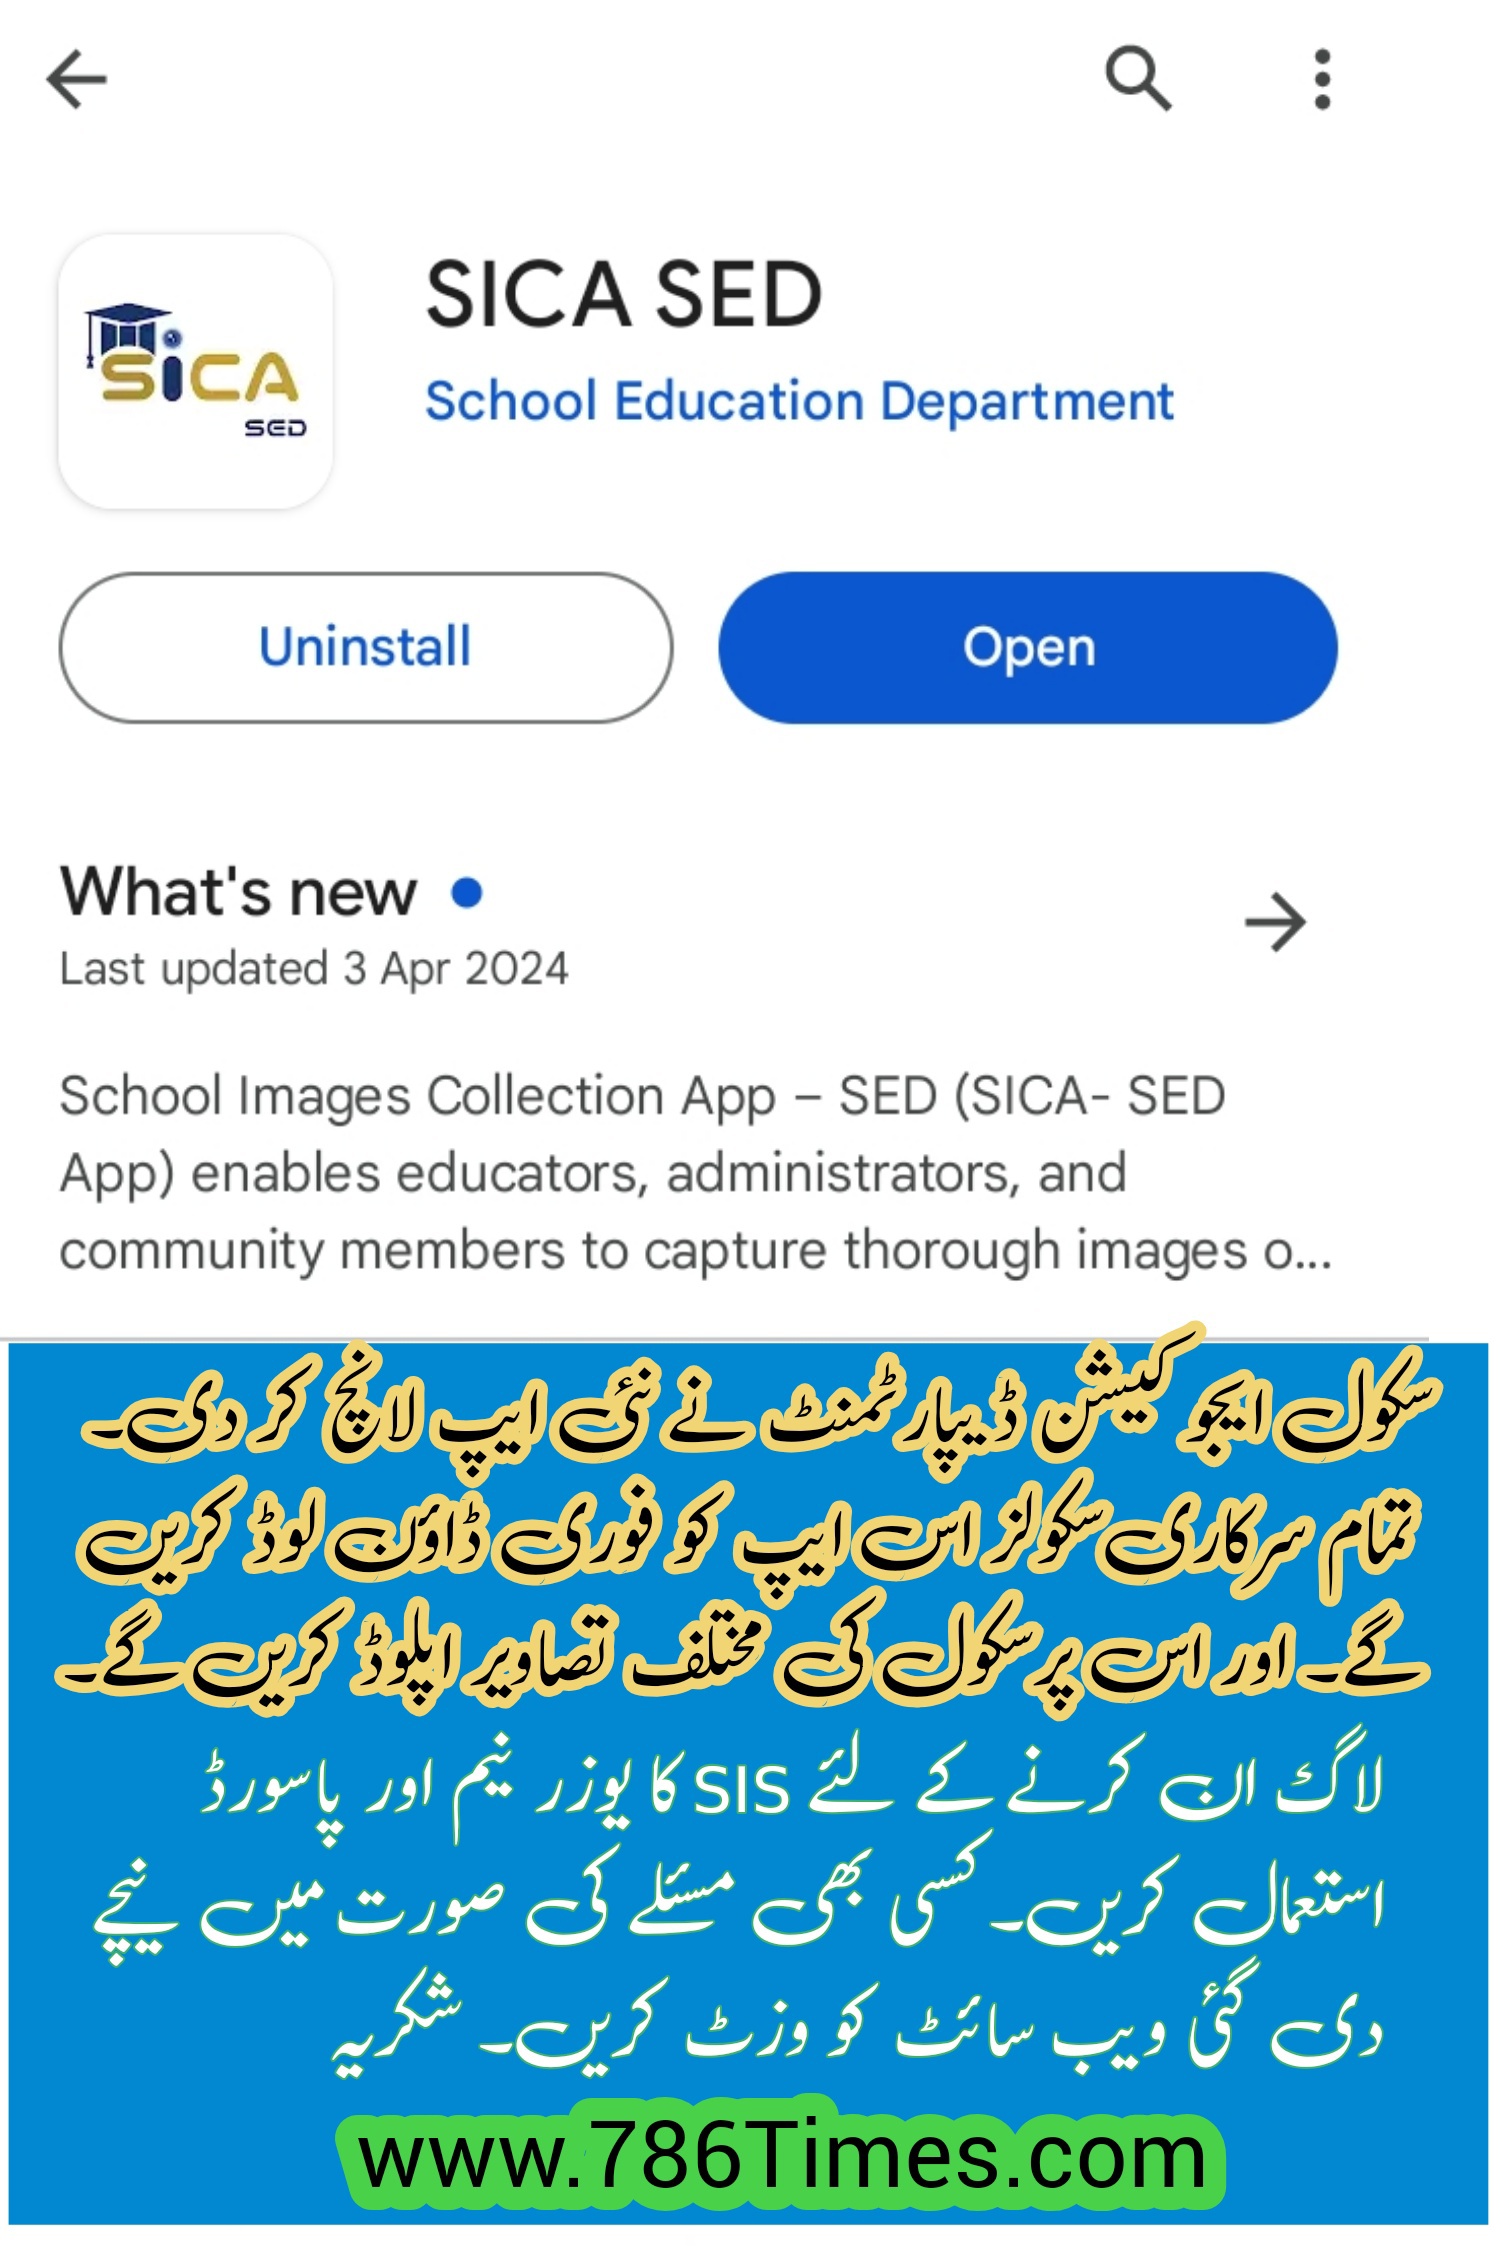 Uploading of School Infrastructure Images on SICA SED App